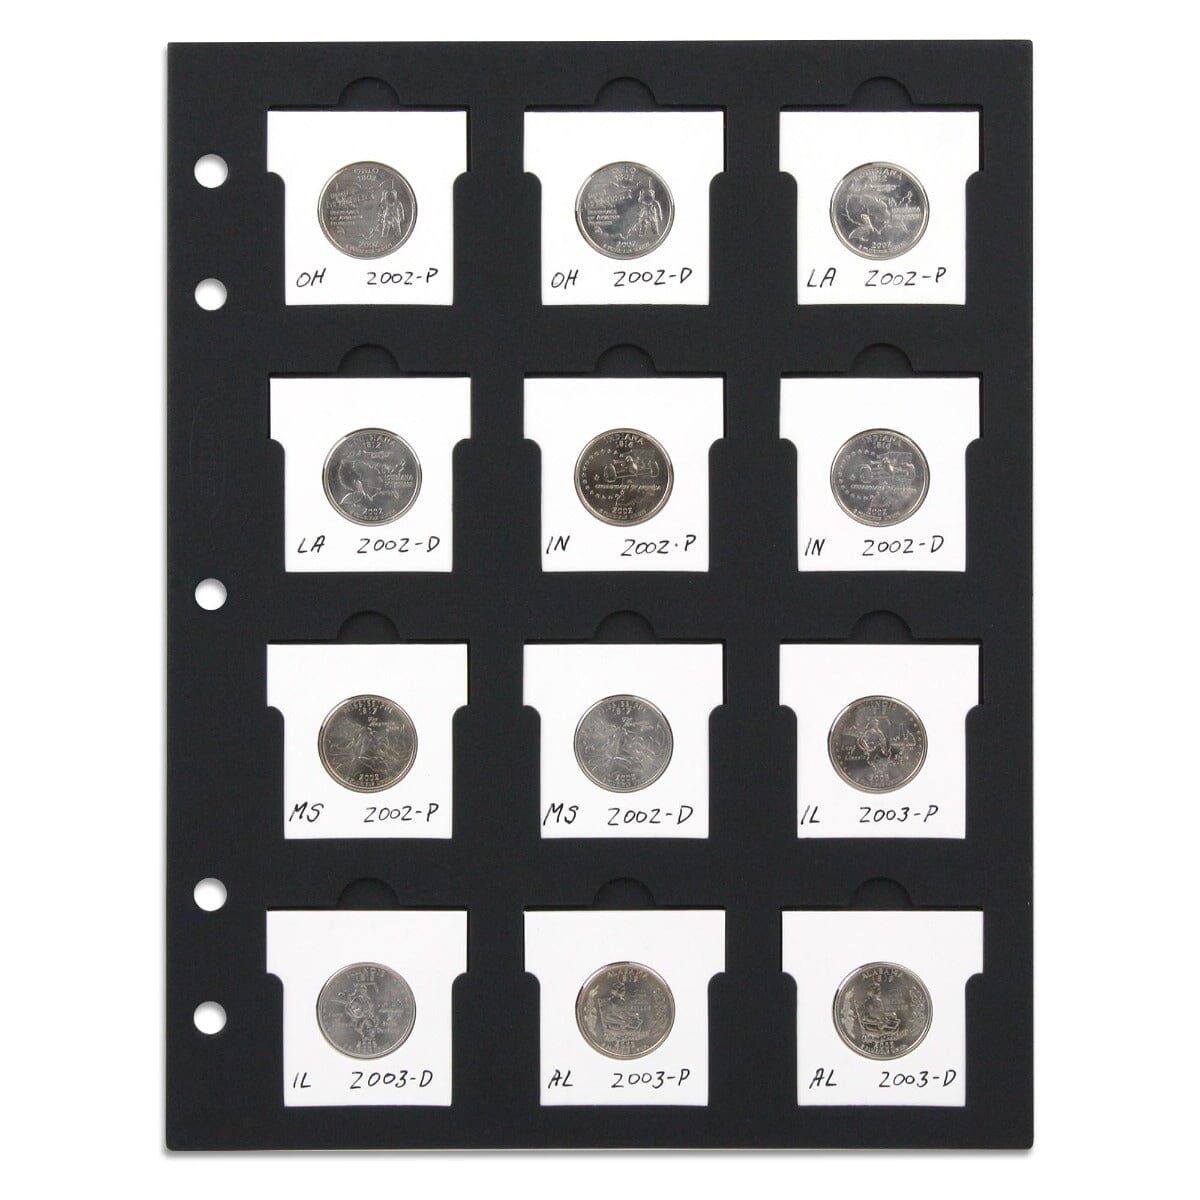 coins displayed in slotted paper page for coin collecting